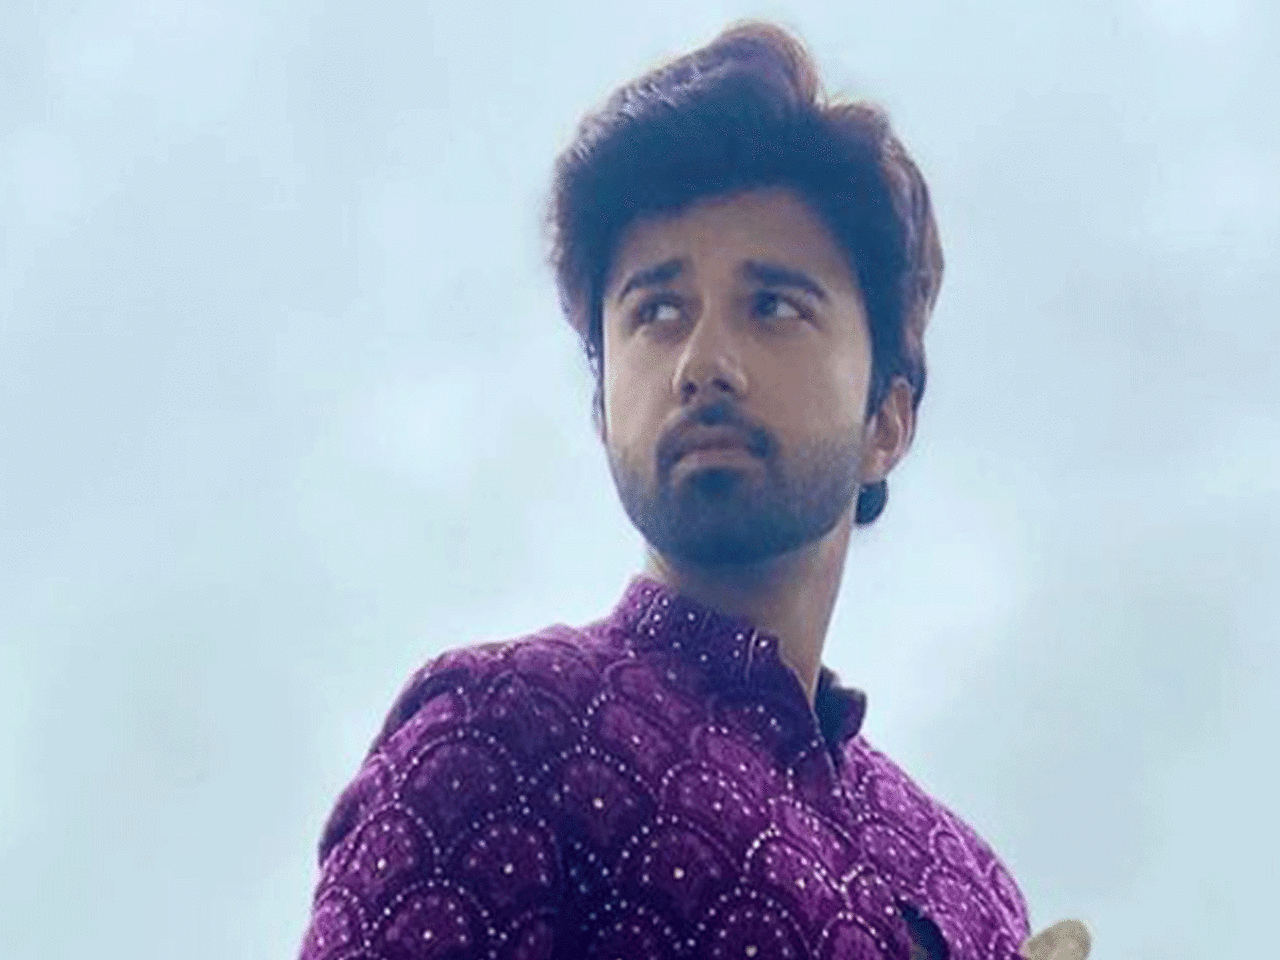 Avinash Mukherjee on turning naag in Sasural Simar Ka 2: I don't intend to give competition to naagins on TV, but create my own space - Times of India